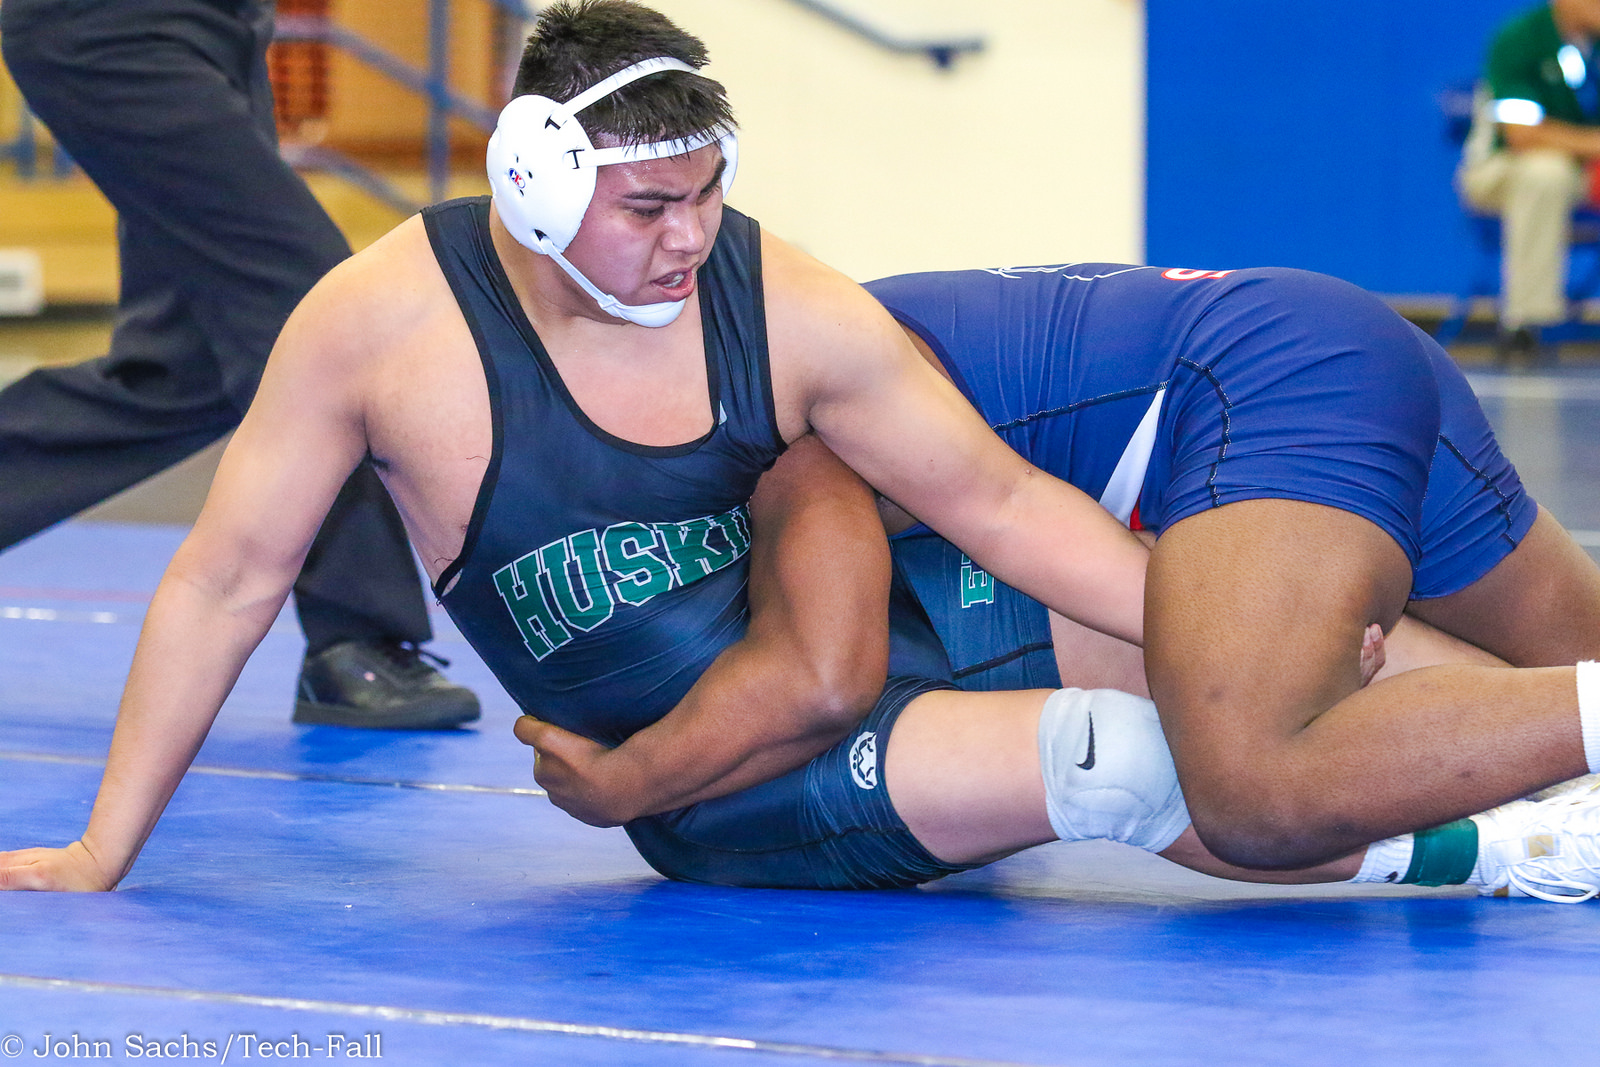 East Los Angeles College's Efren Velez wrestles Santa Rosa JC's Jarin Shakur in the 197-pound weight class at the 2018 State Wrestling Championships at Cerritos College. (Photo Courtesy of the CCCAA)